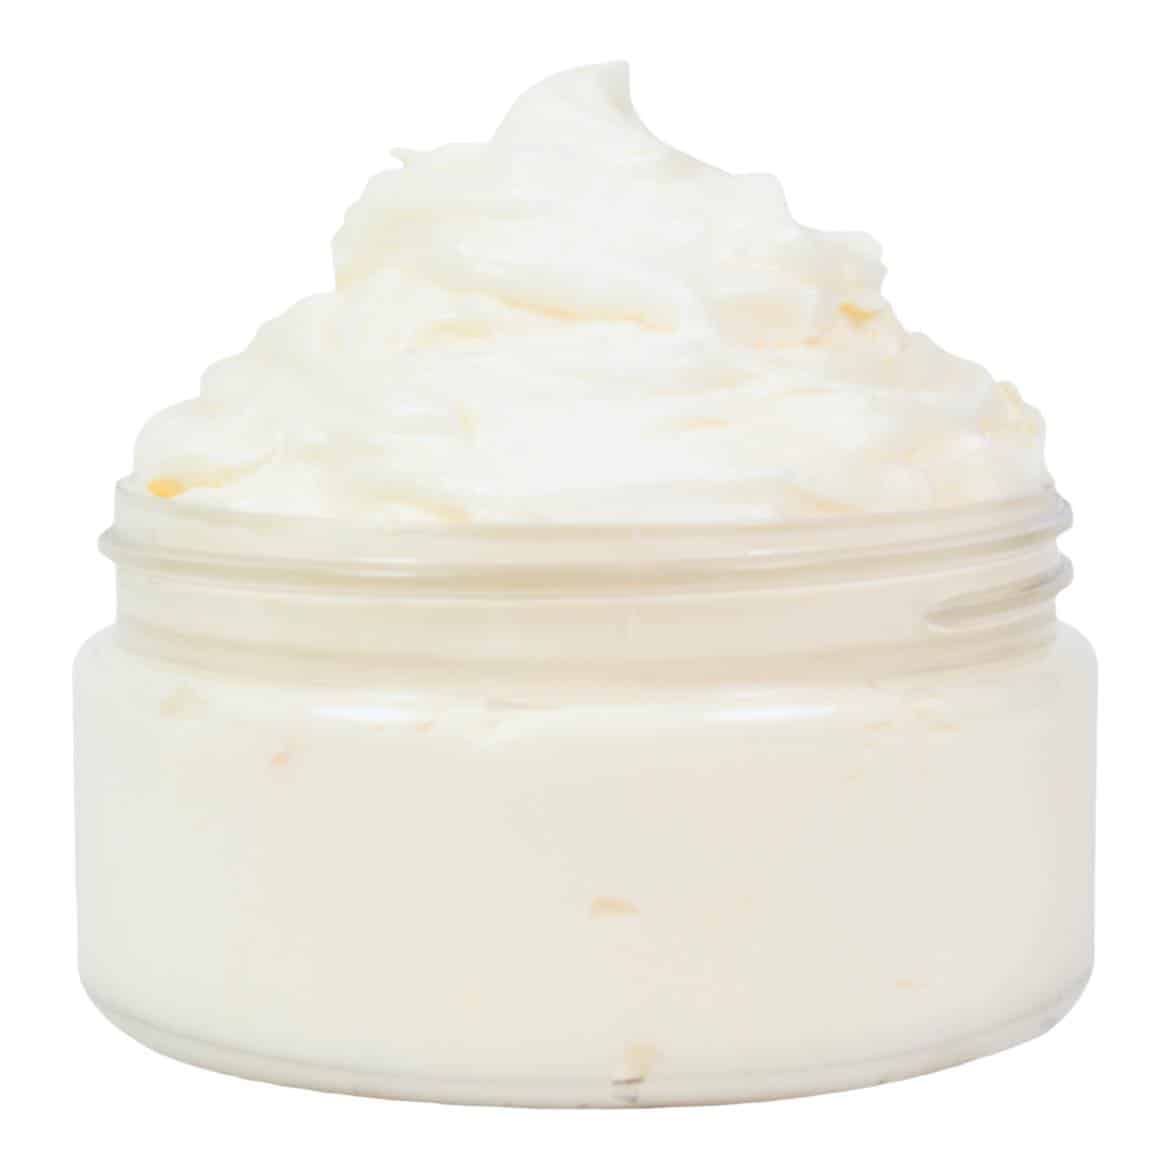 Body Butter Making Assessment Aftershave Scents